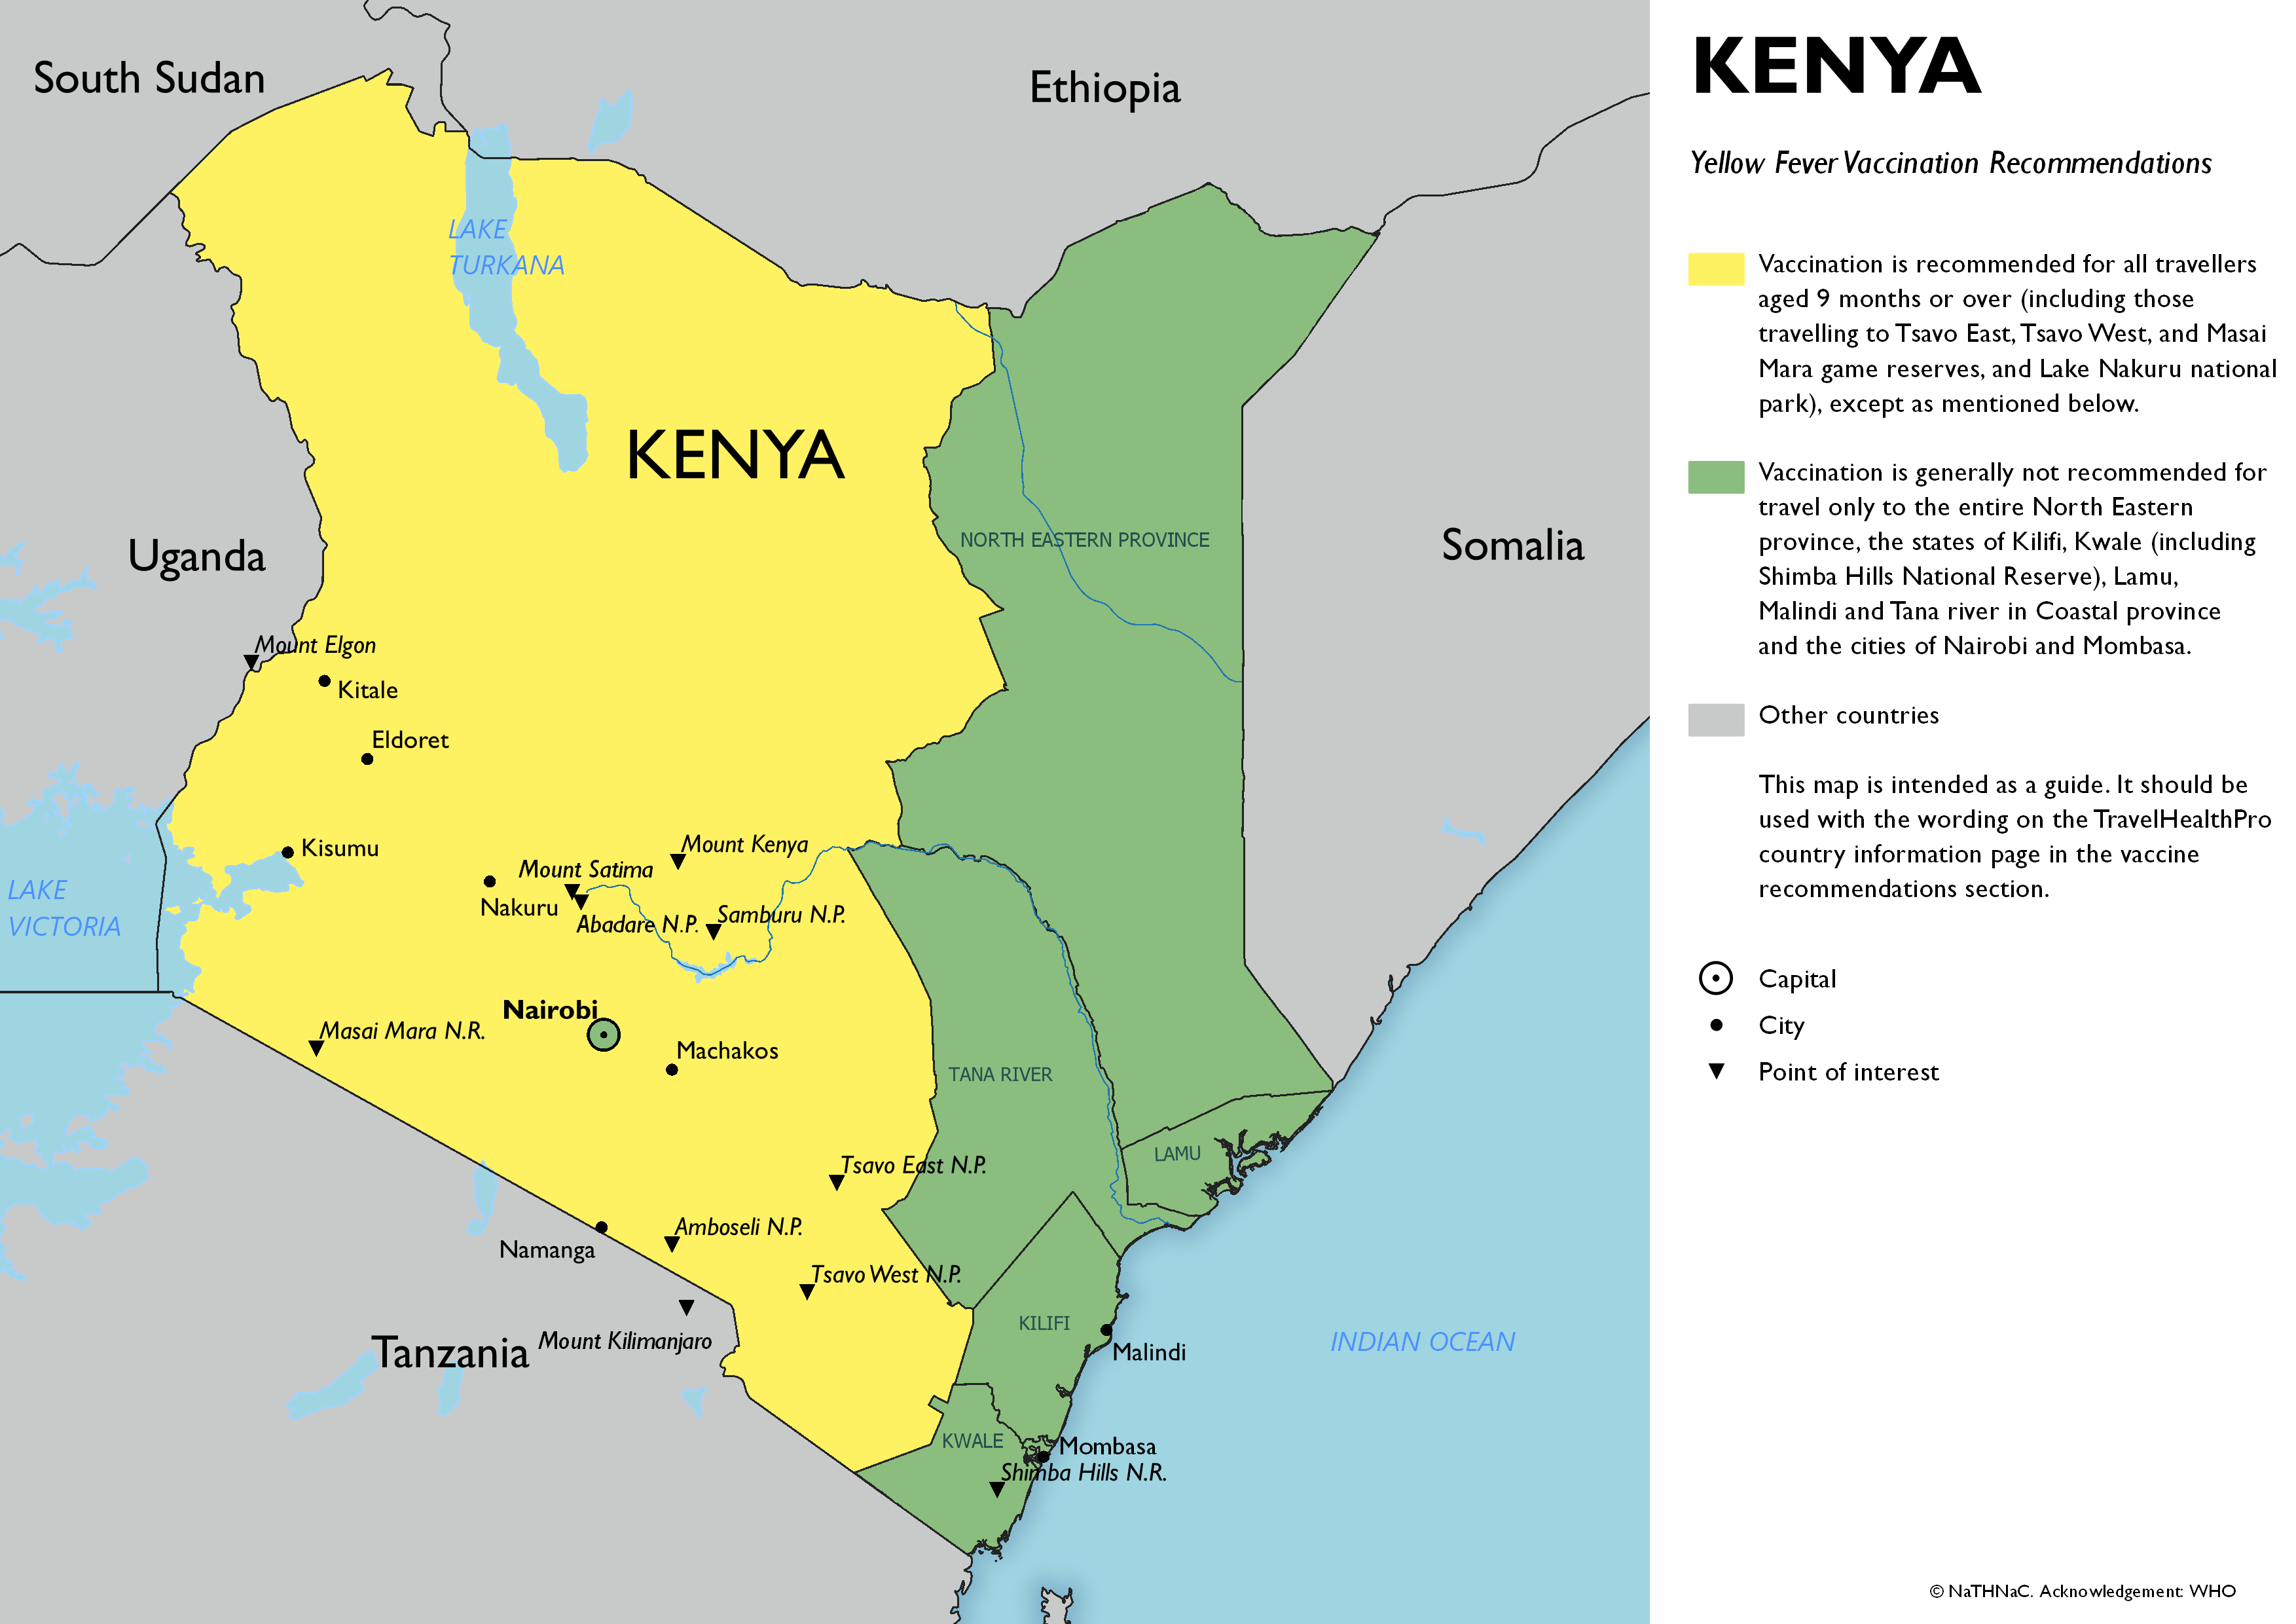 Yellow fever vaccine recommendation map for Kenya